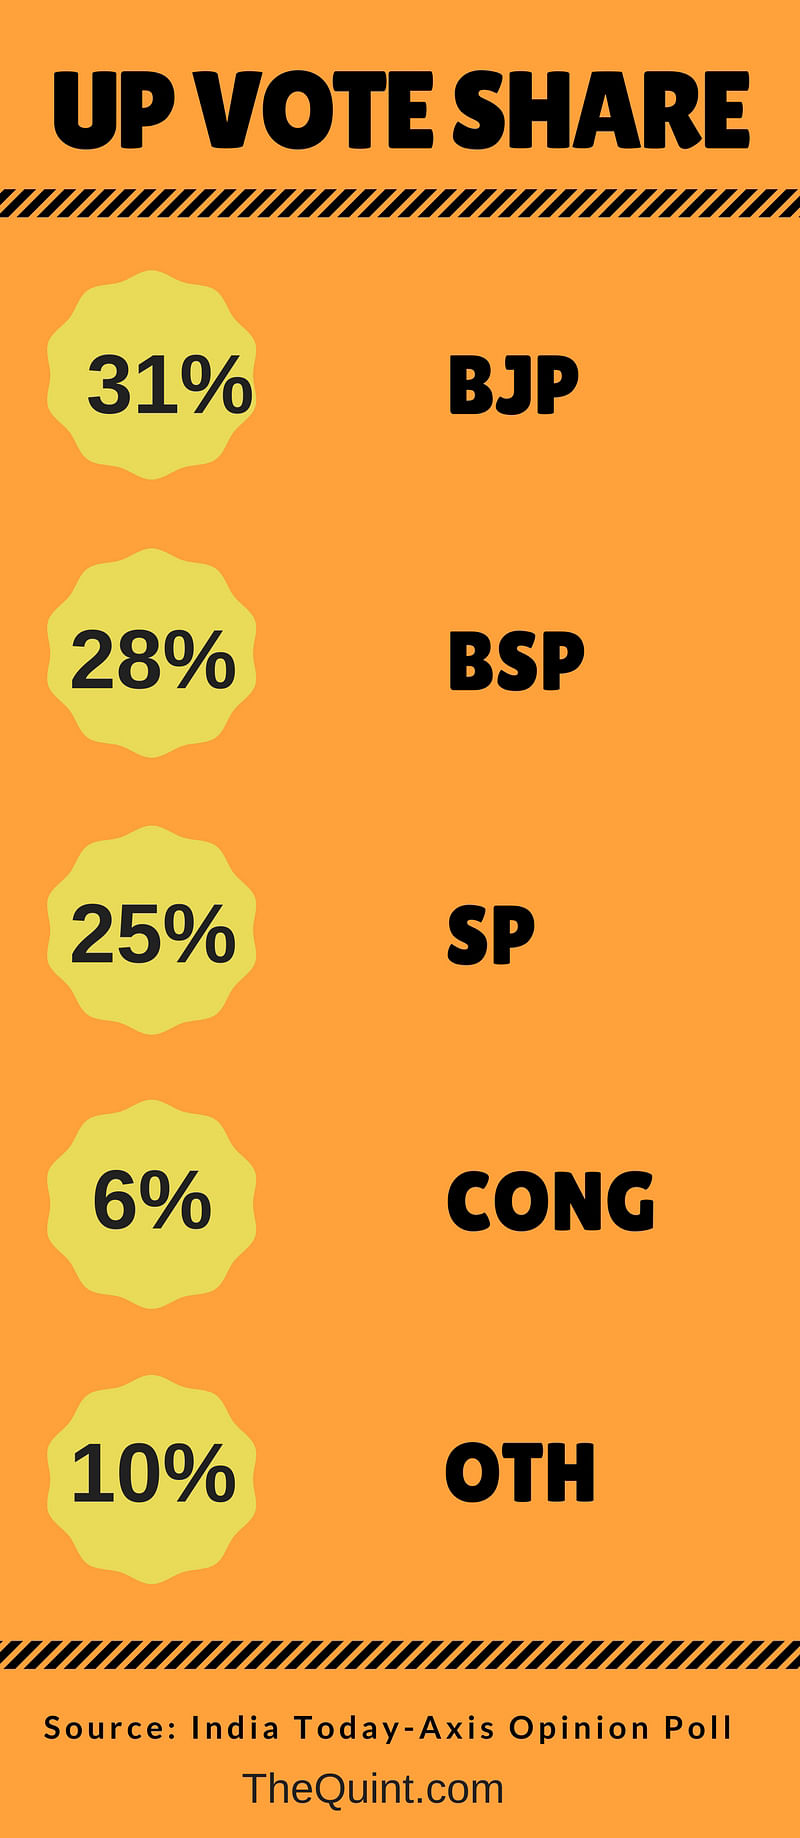  The incumbent Samajwadi Party is expected be at third spot with 94 to 103 seats, according to the poll.